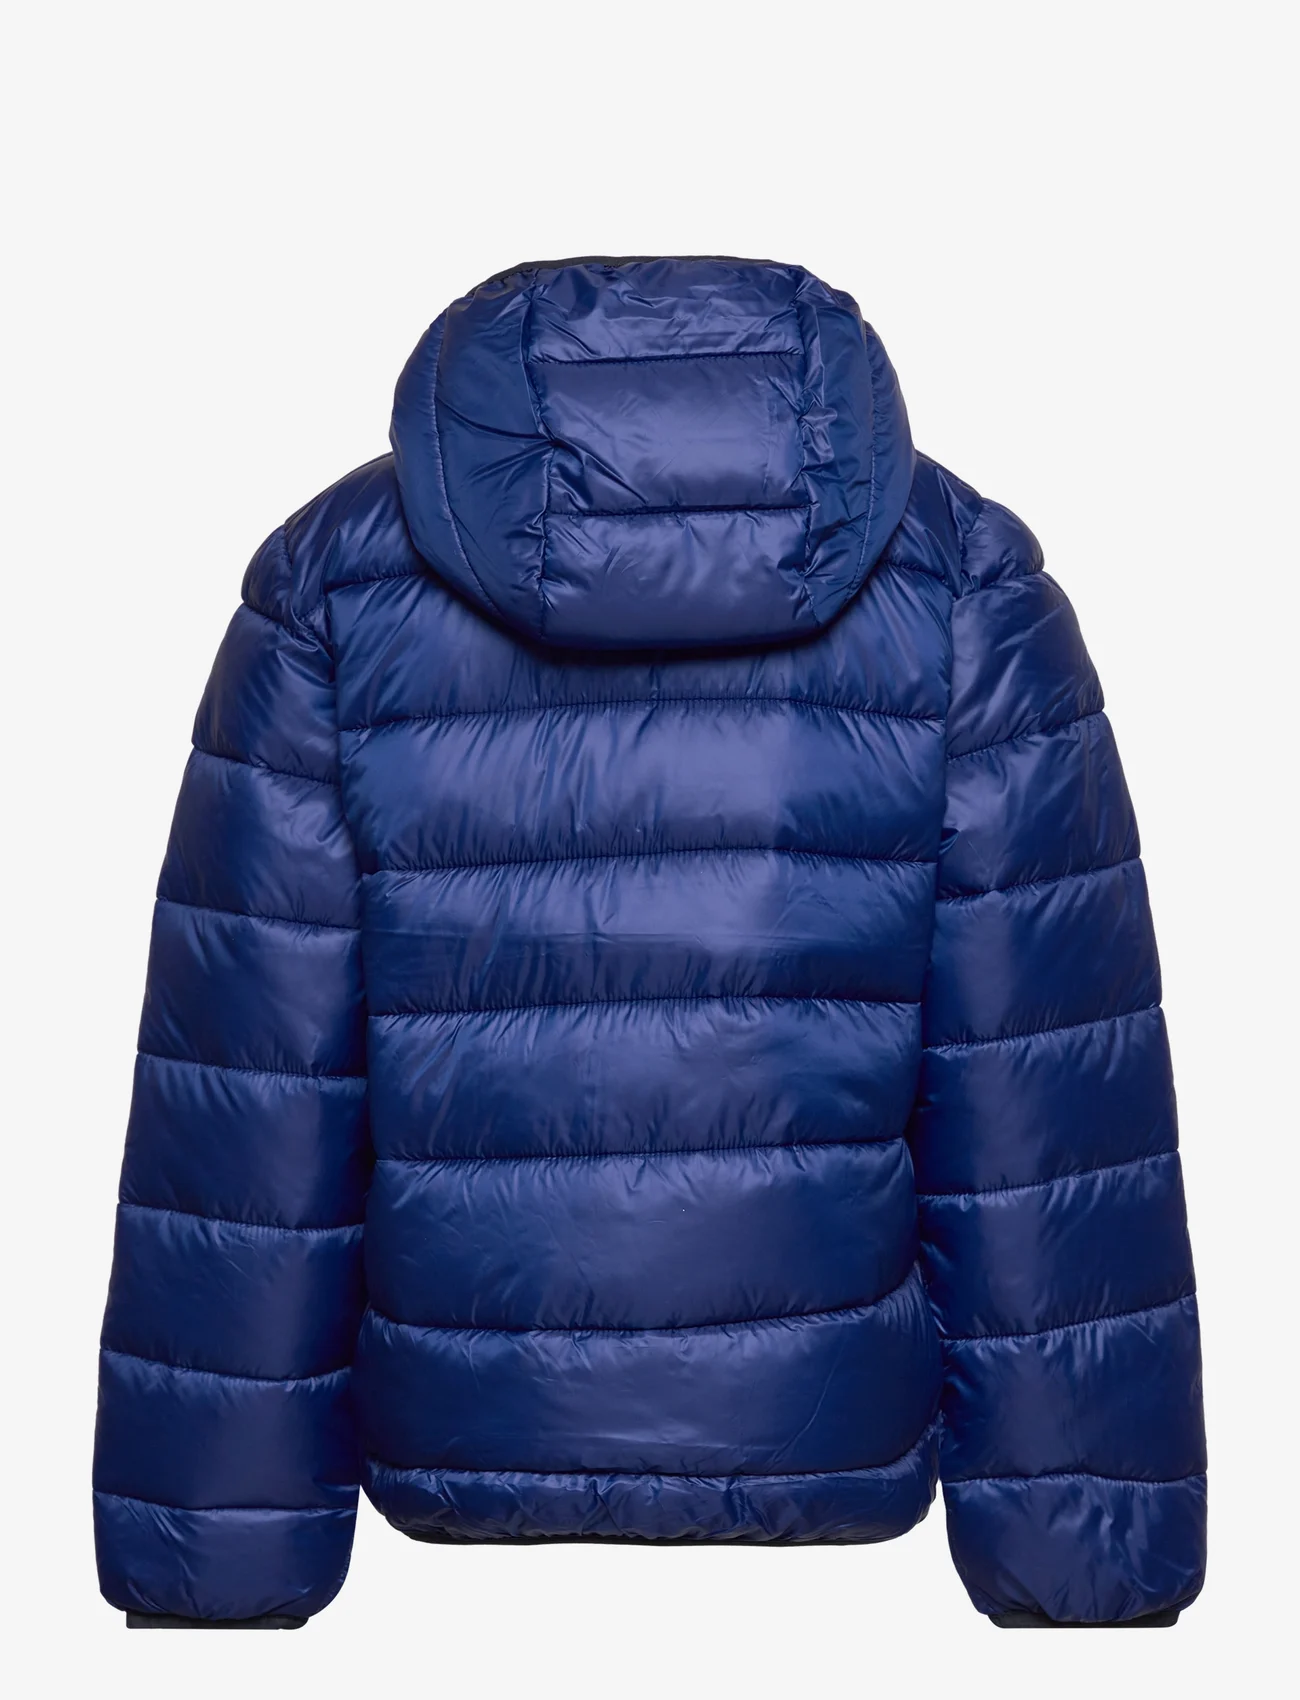 Champion - Hooded Jacket - insulated jackets - bellwether blue - 1